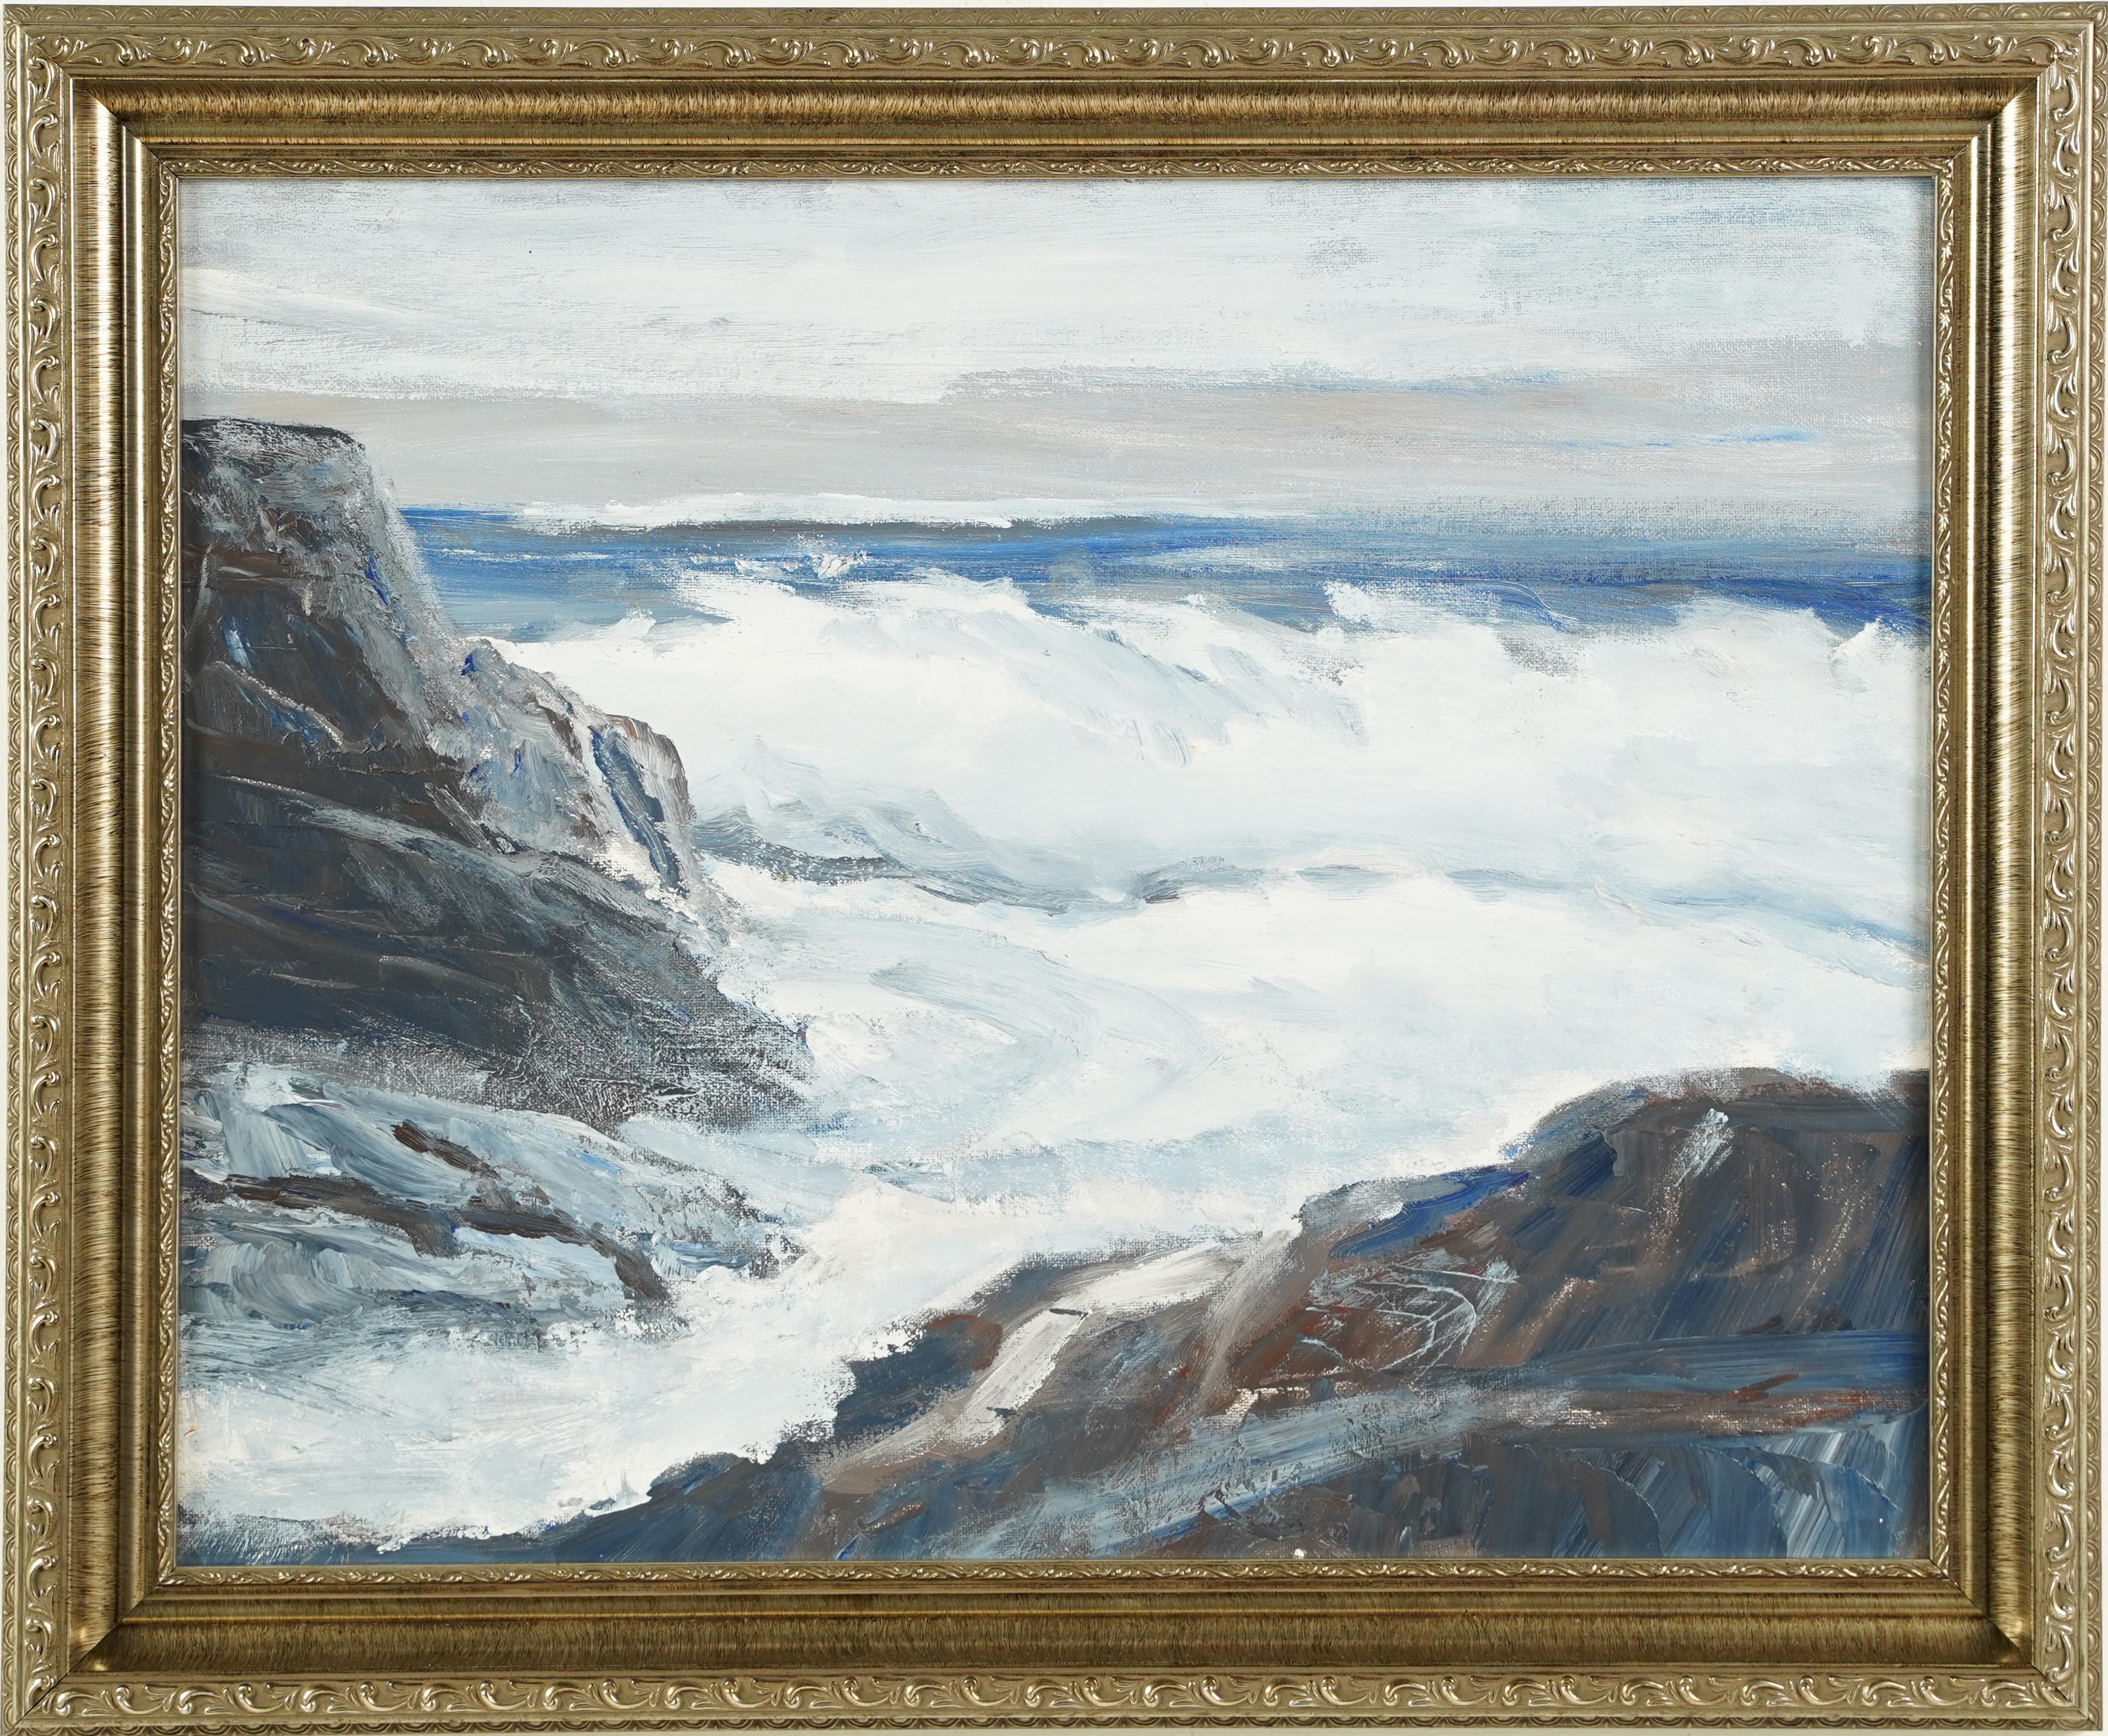 Unknown Landscape Painting -  Antique American School Rough Surf Coastal Seascape Beach Framed Oil Painting